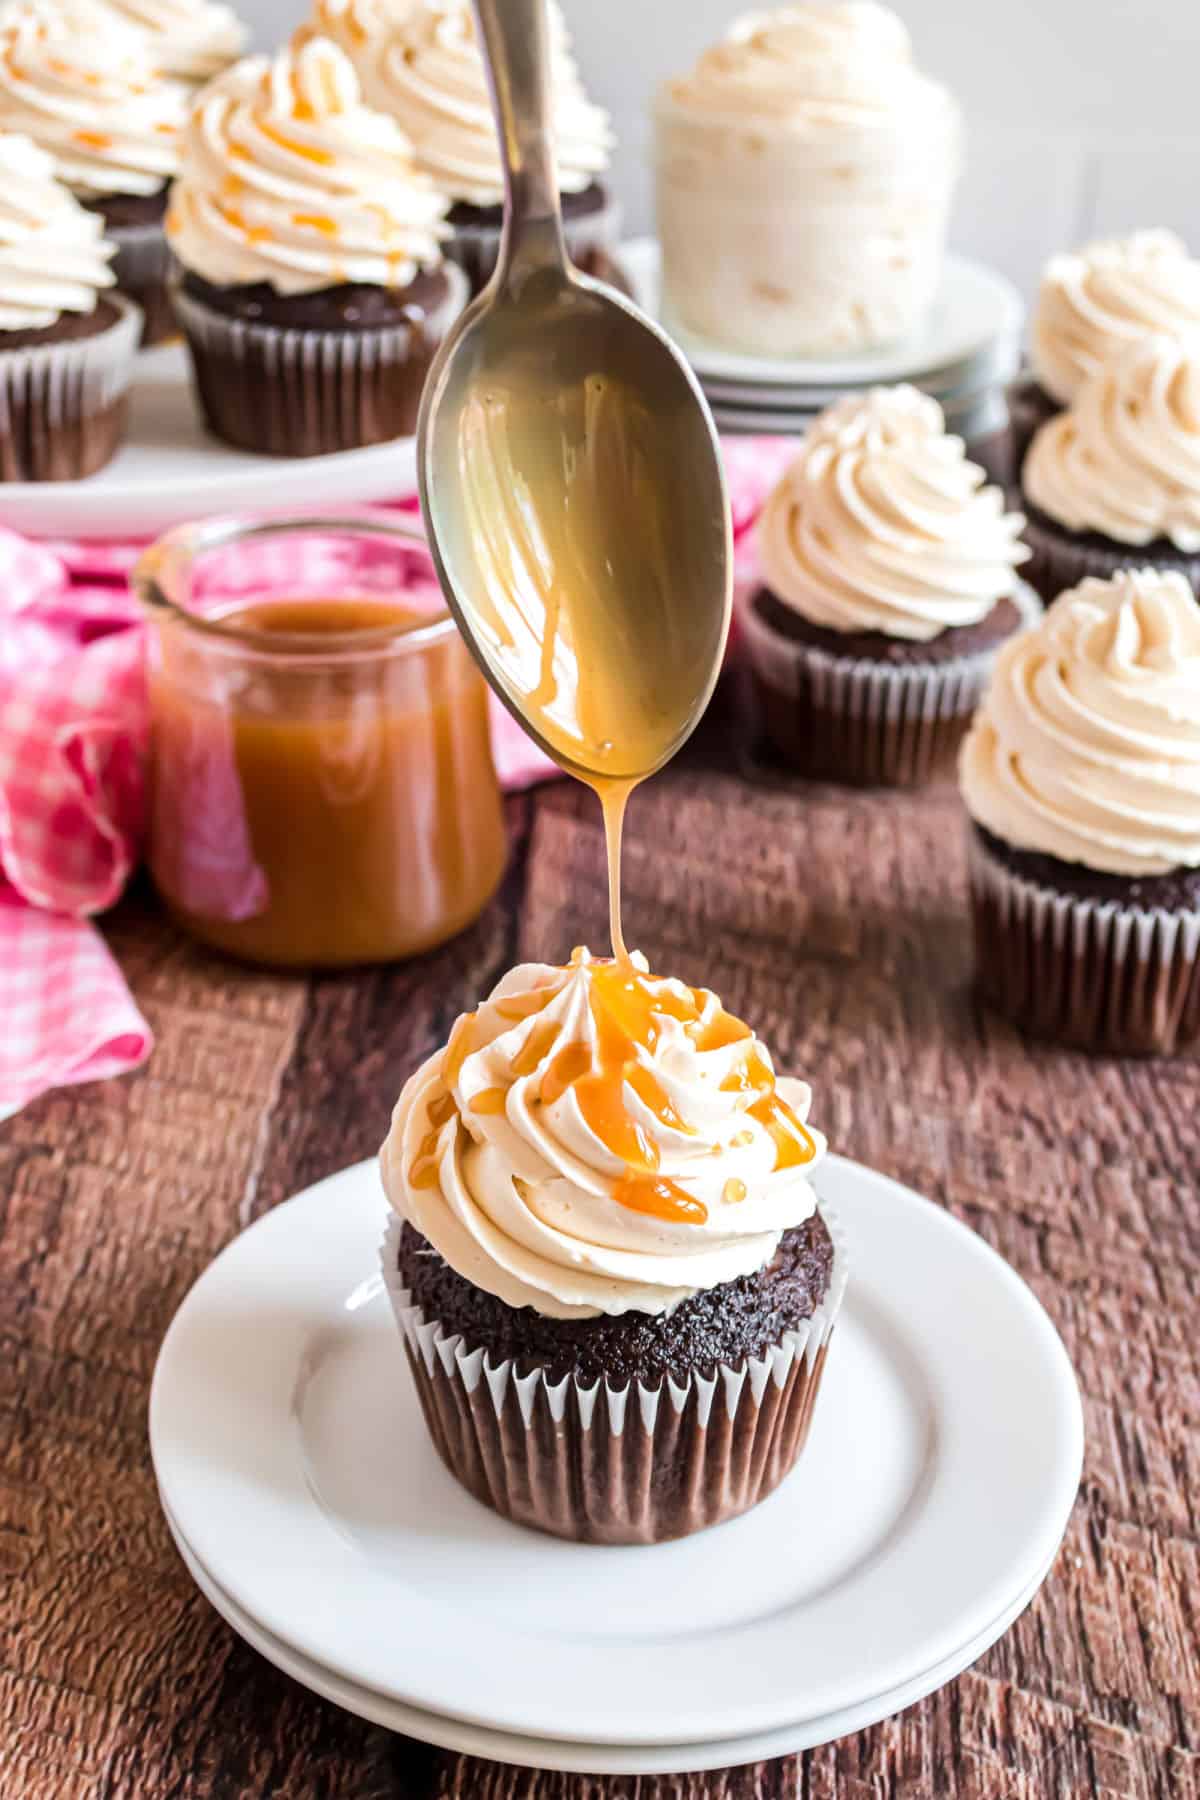 Caramel drizzled over the top of a swiss meringue frosted cupcake.